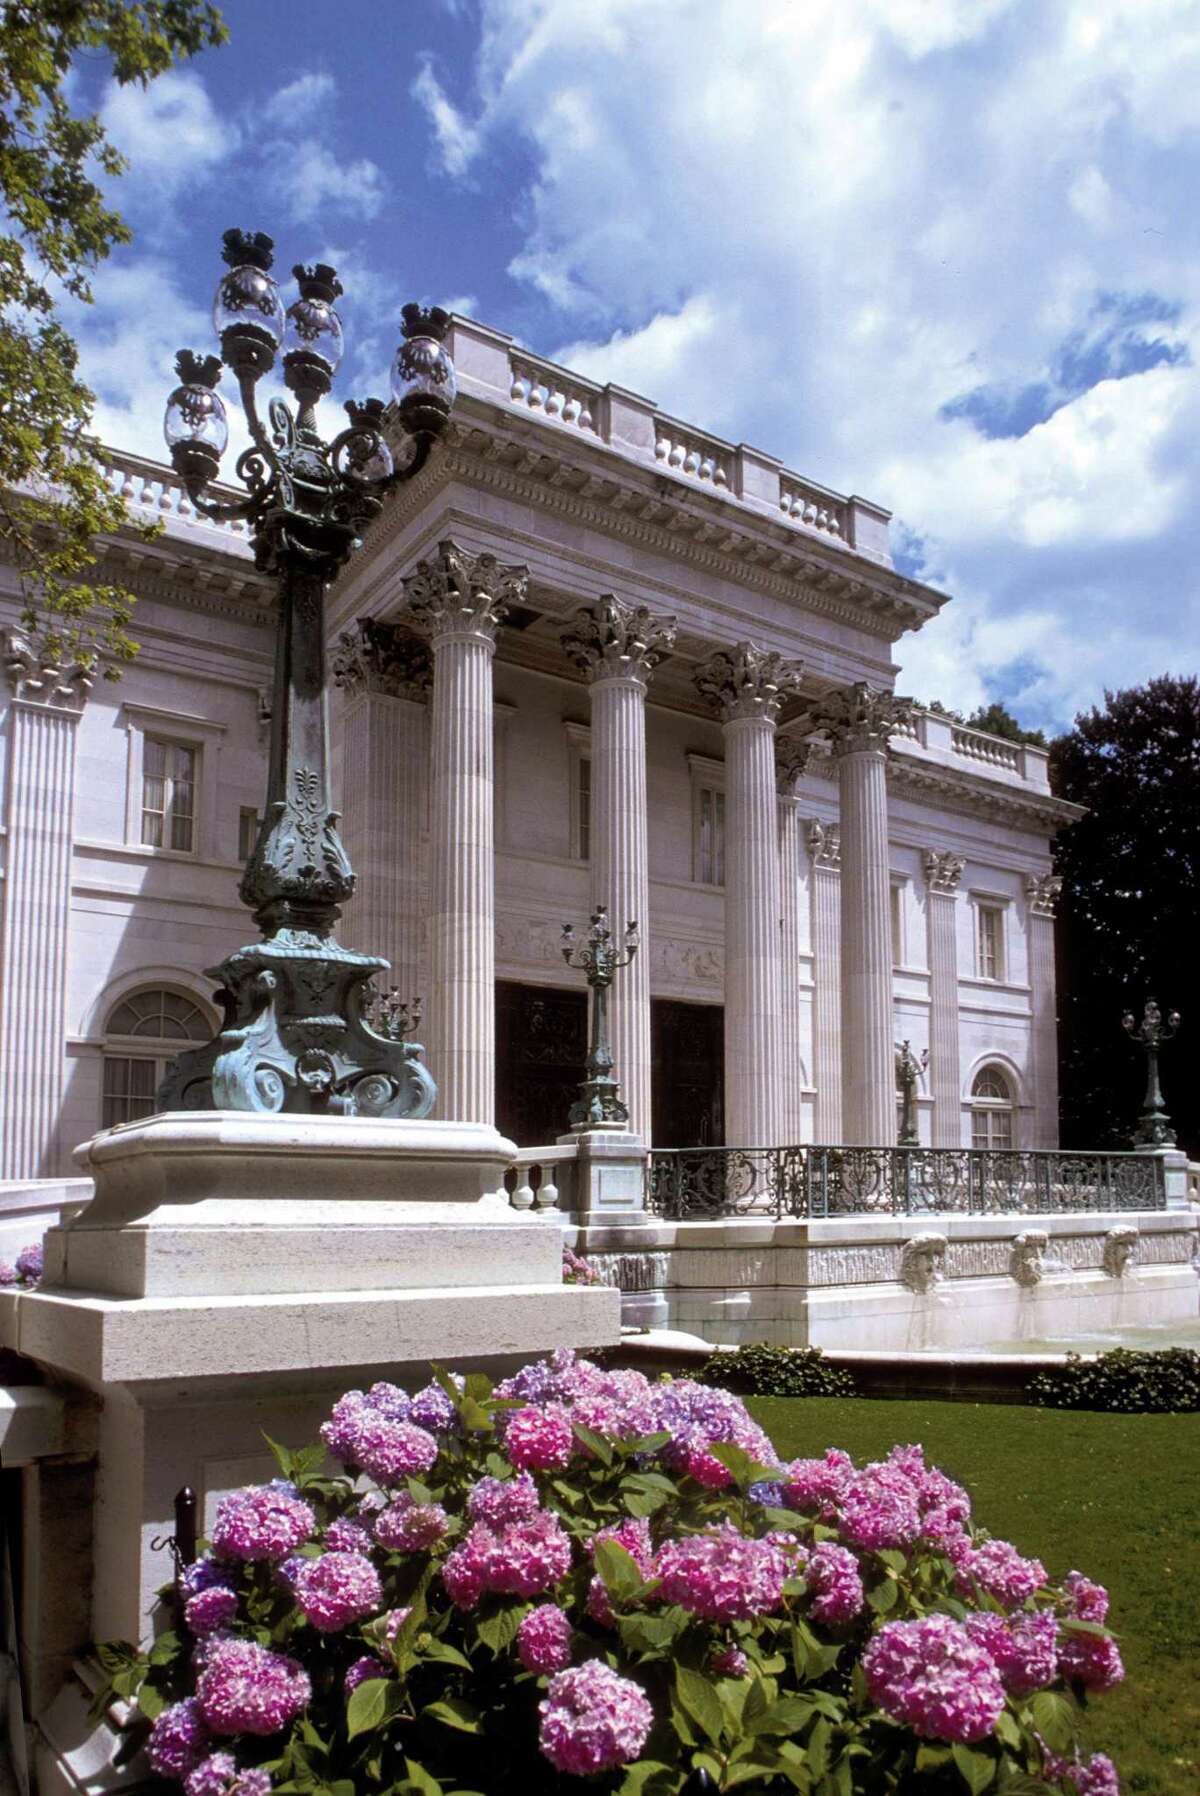 Take a peek inside the Newport Mansions from the Colonial era through the Gilded Age, including Marble House in Newport, R.I.